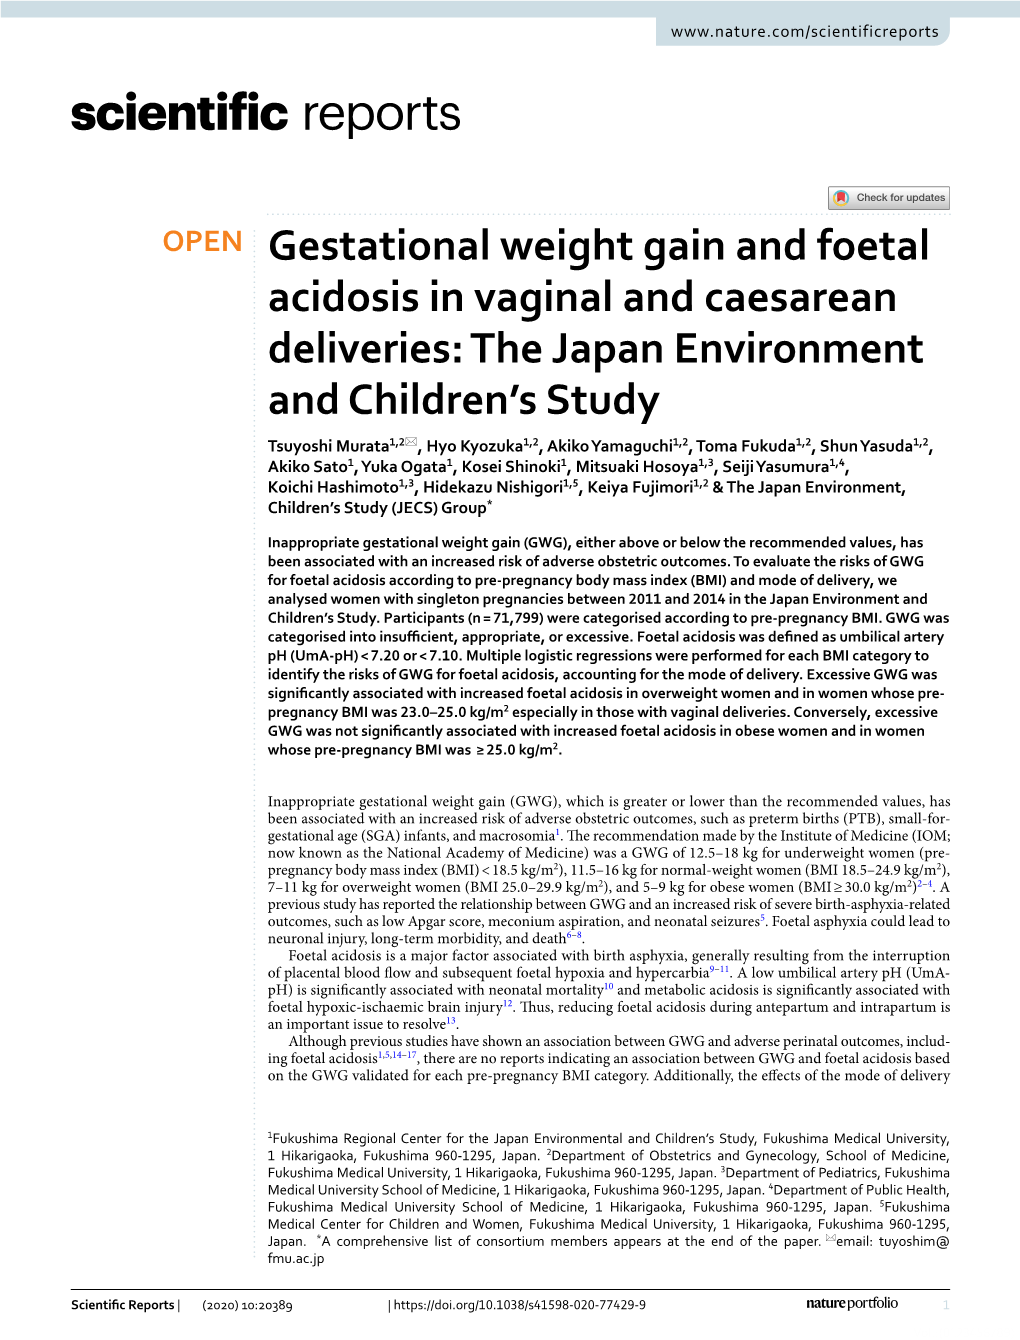 Gestational Weight Gain and Foetal Acidosis in Vaginal and Caesarean Deliveries